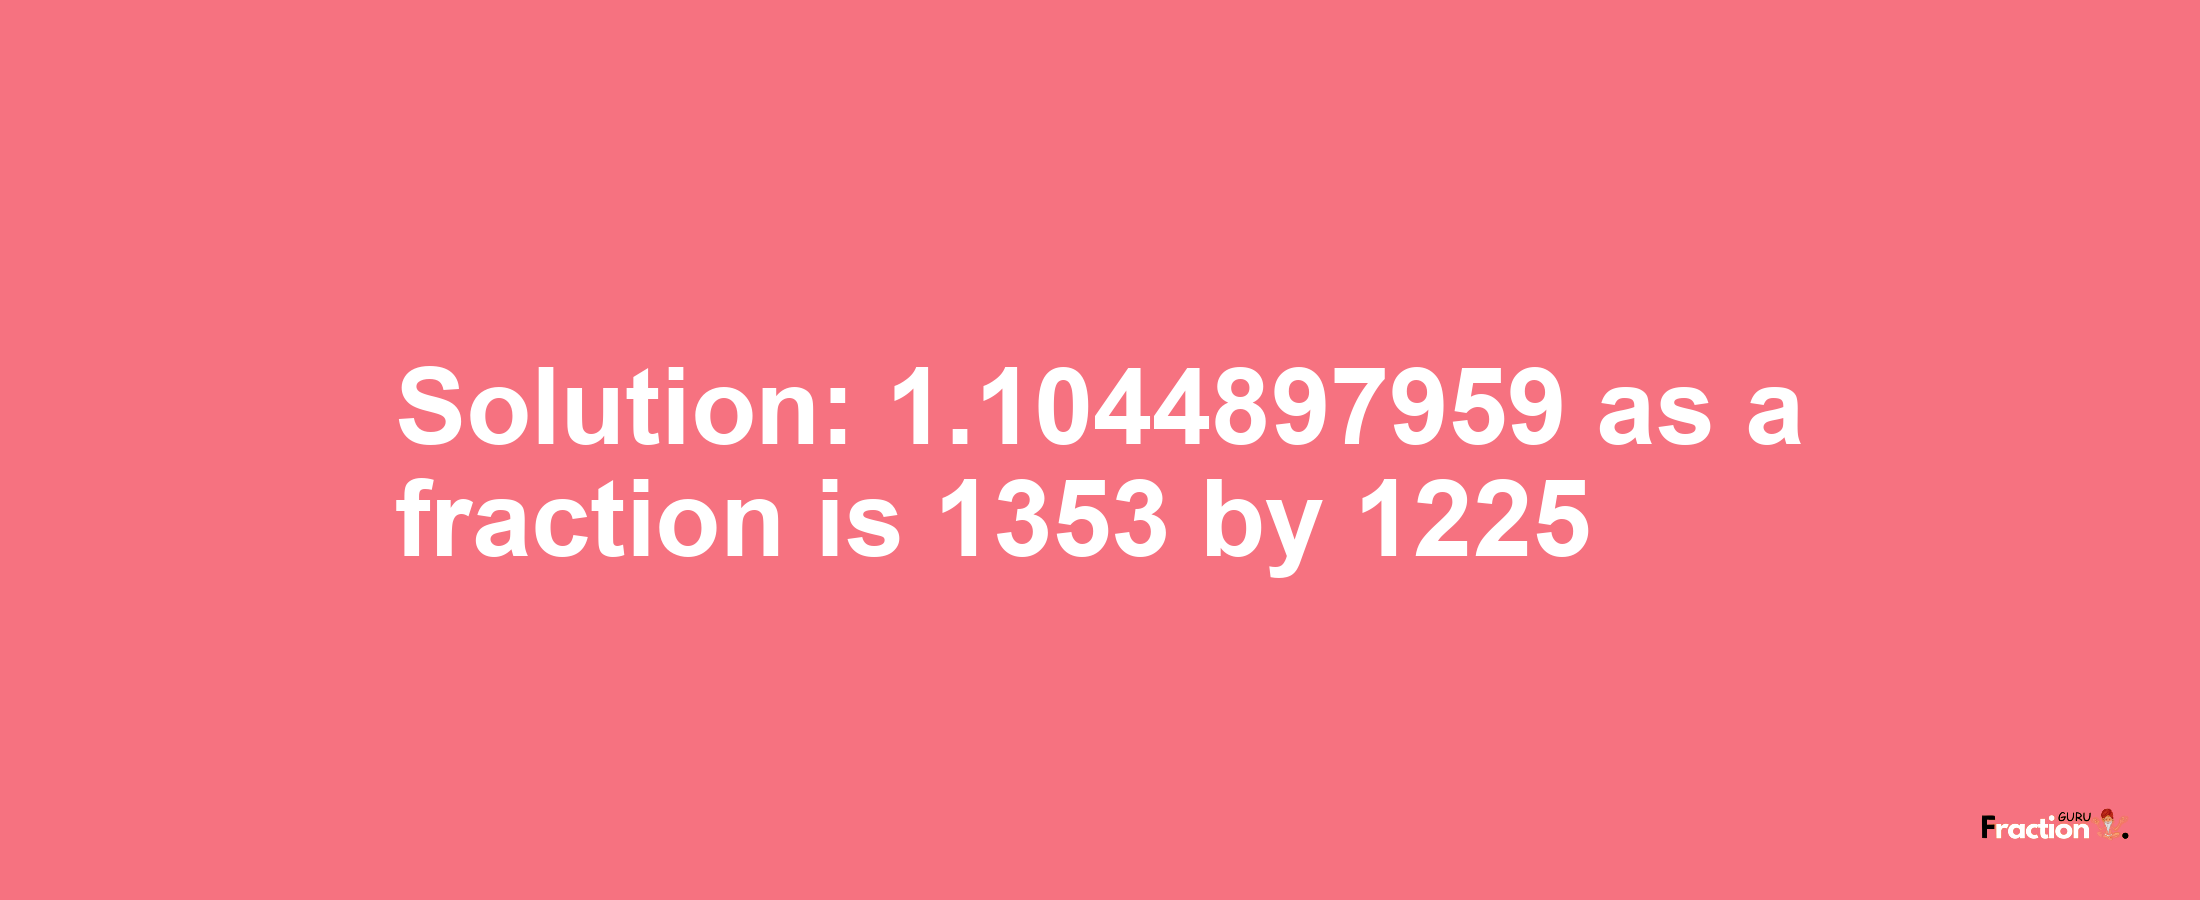 Solution:1.1044897959 as a fraction is 1353/1225